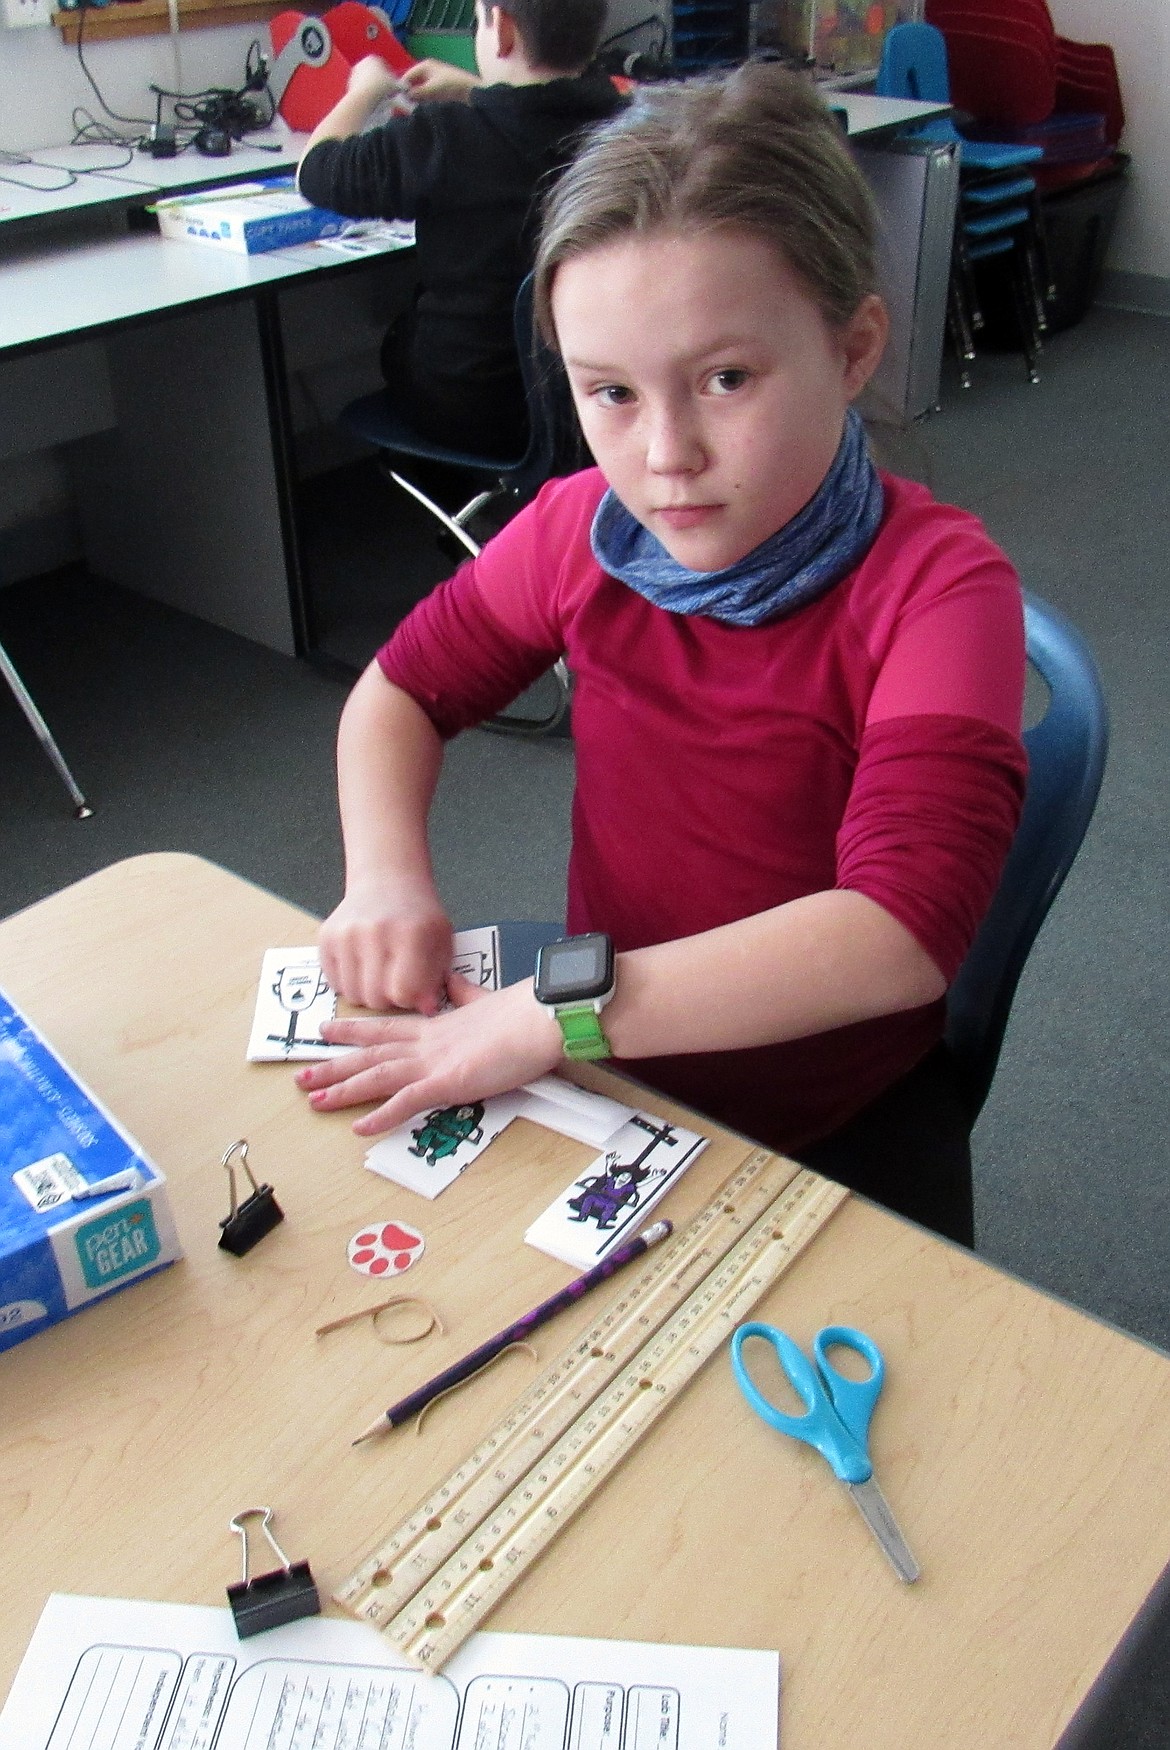 An Idaho Hill fourth-grader participates in the "Twist-O-Matic Challenge" during the school's recent STEaM (science, technology, engineering, art, math) activity.